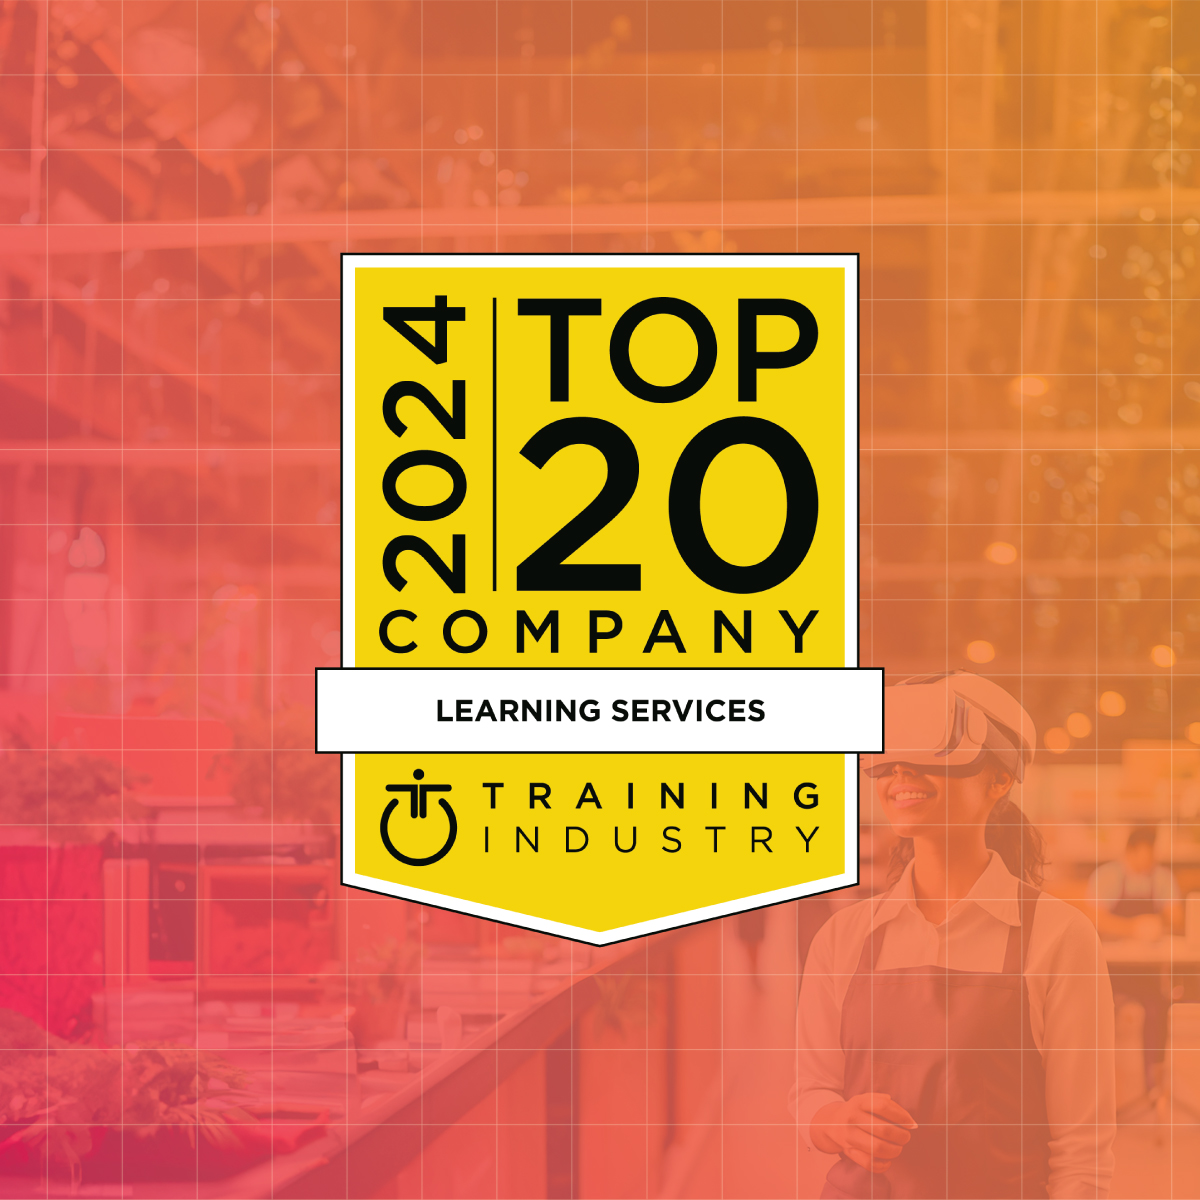 CGS NAMED TO TRAINING INDUSTRY’S TOP 20 COMPANIES LIST FOR LEARNING SERVICES